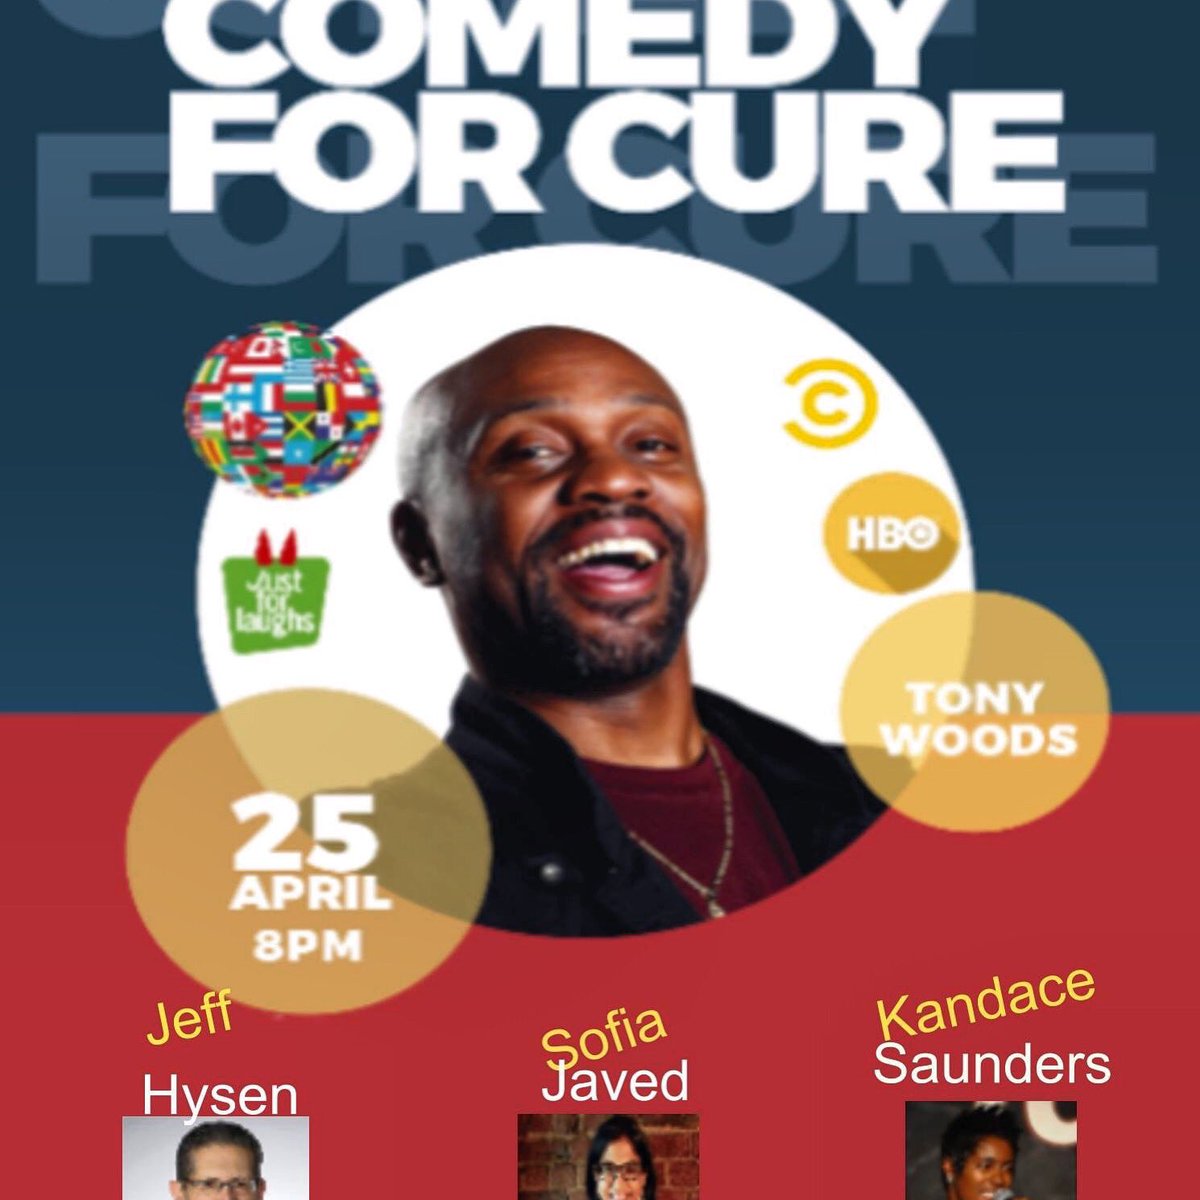 Comedy For Cure is back and looking forward to increased awareness and more money to impact positive change in the lung cancer community.  Tickets can be purchased from our website and on EventBrite @chrisdraft @erycanolan @dustywater @GO2Foundation @MewhineyFdn